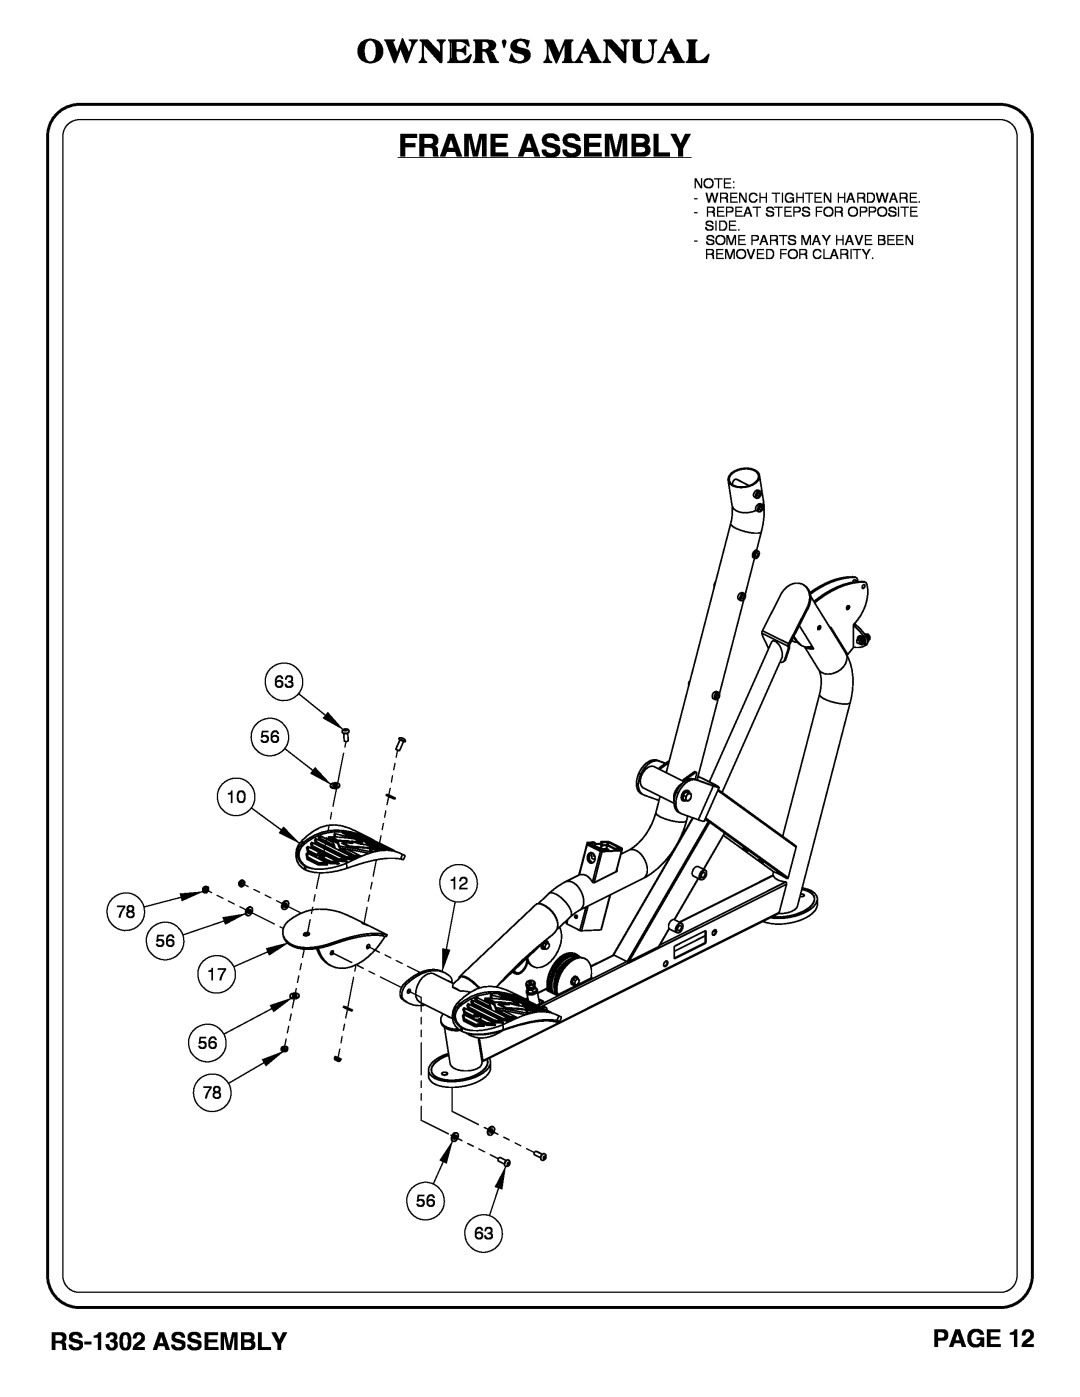 Hoist Fitness Owners Manual Frame Assembly, RS-1302 ASSEMBLY, Page, Some Parts May Have Been Removed For Clarity 